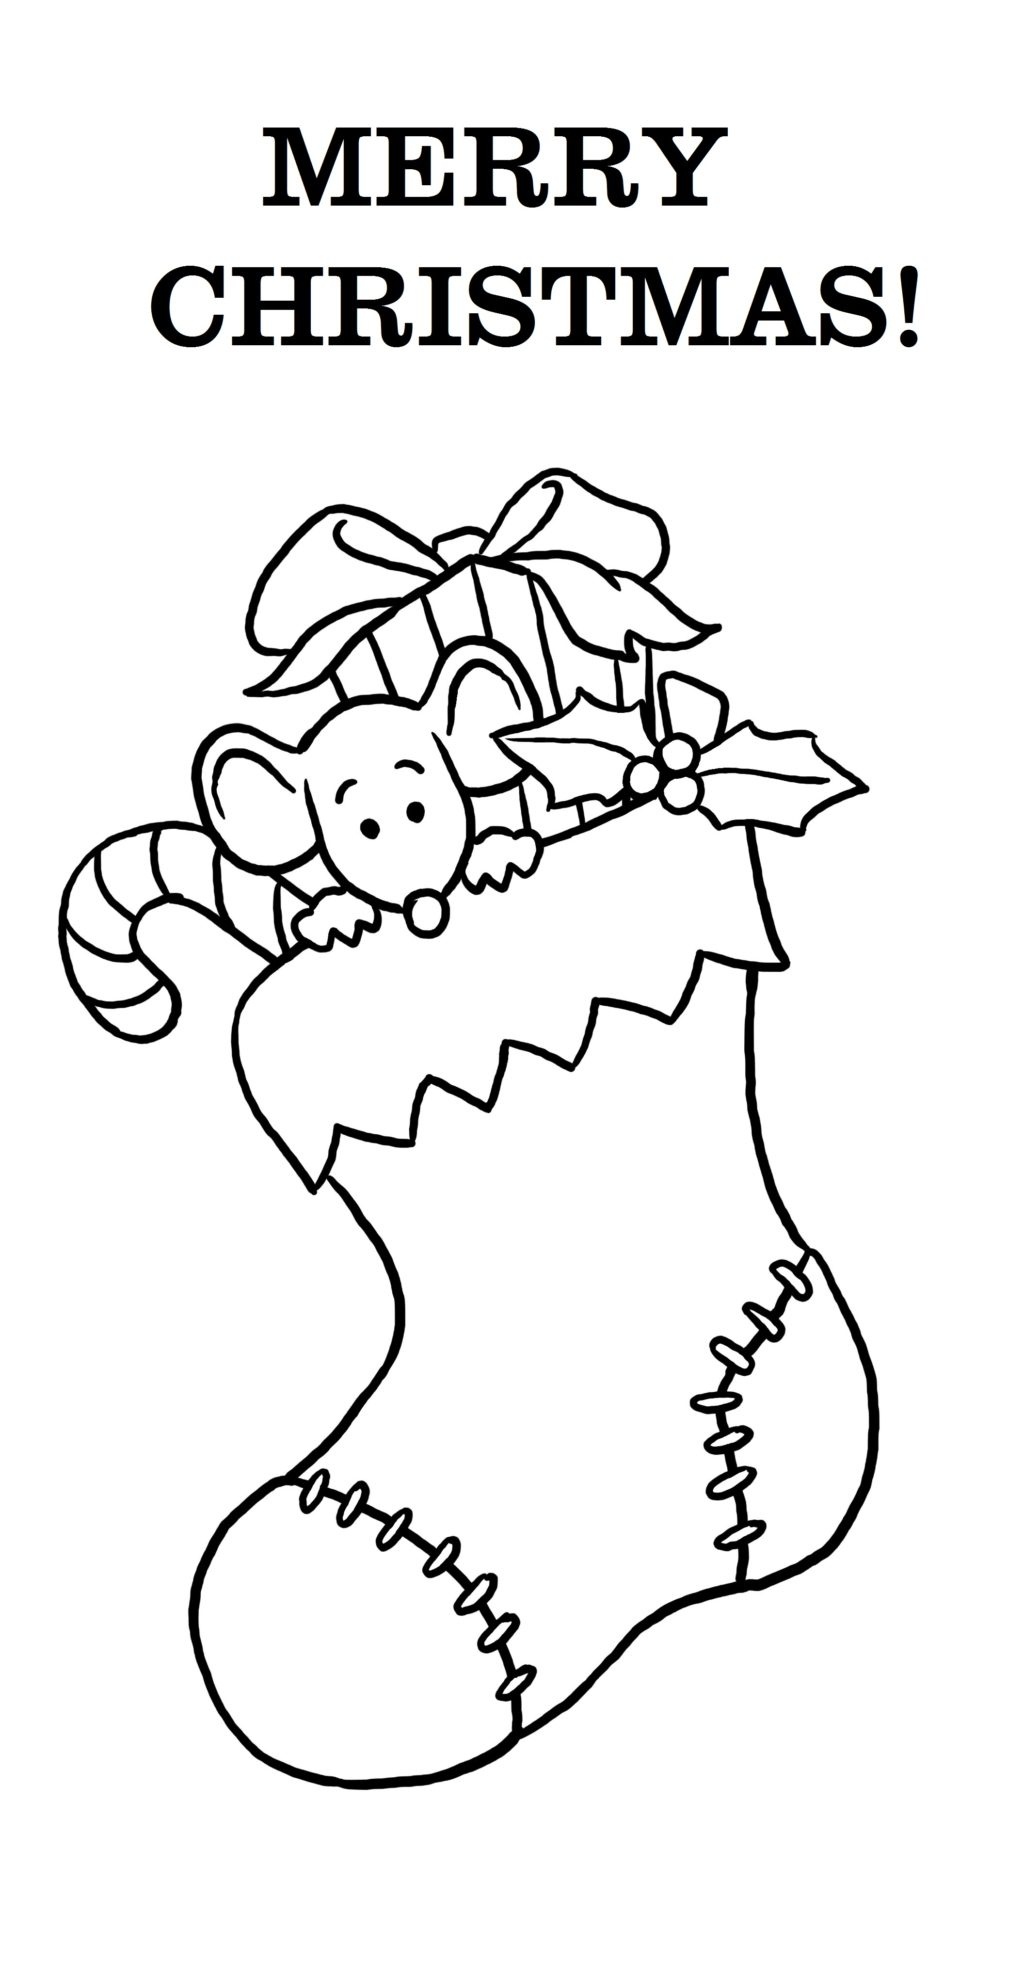 Coloring Book World ~ Coloring Book World Free Printable Merry - Free Printable Christmas Coloring Pages For Kids